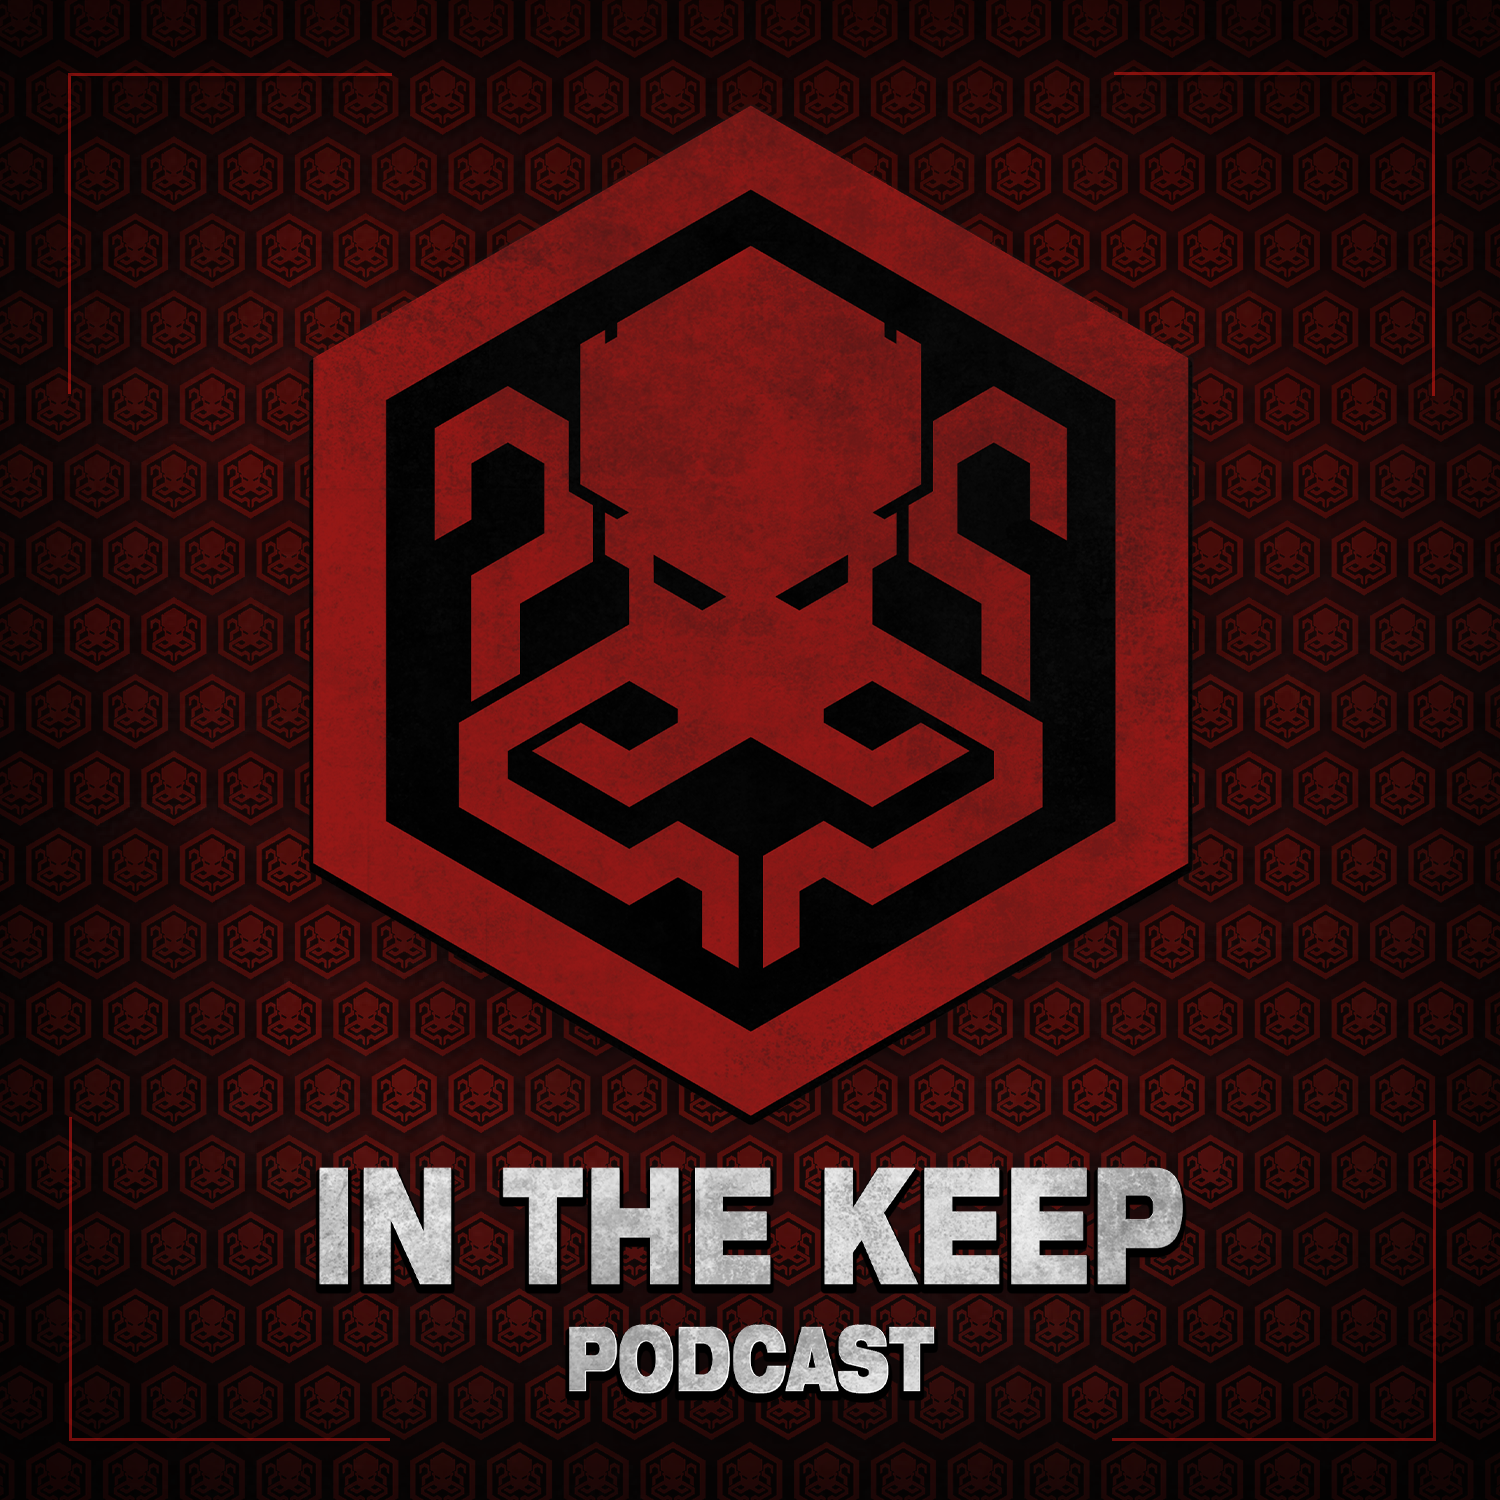 In The Keep Podcast – #66 scar3crow (GRAVEN)